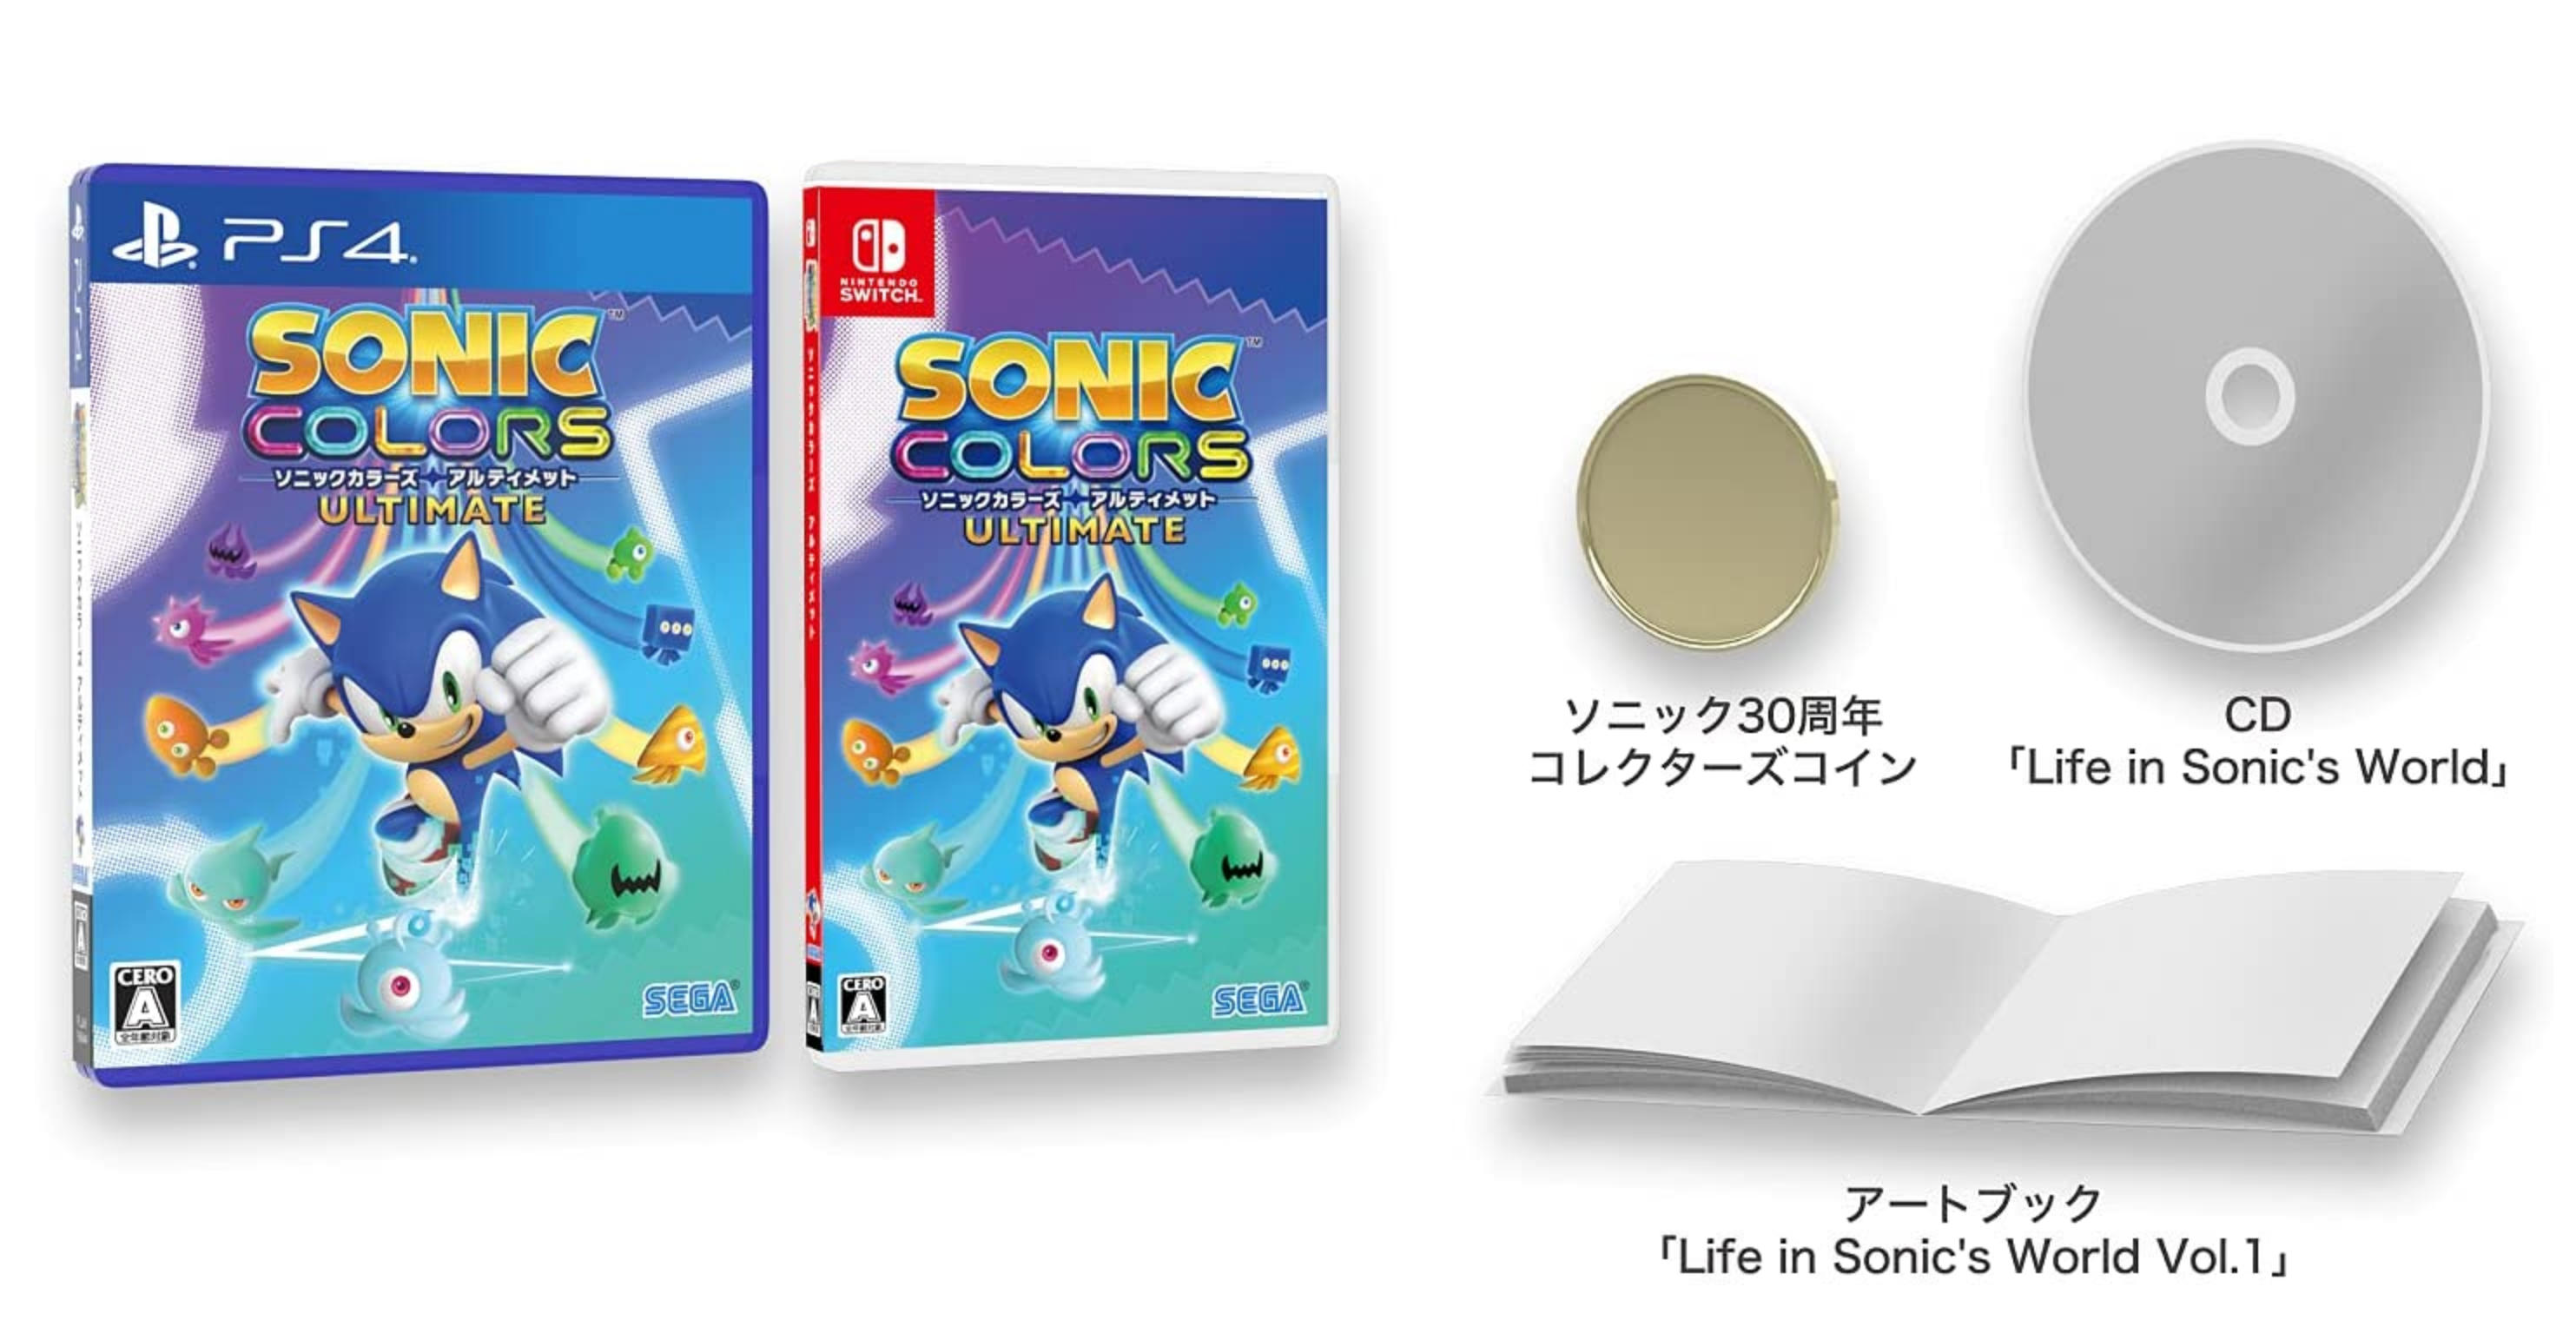 Review: Sonic Colors: Ultimate (Nintendo Switch)